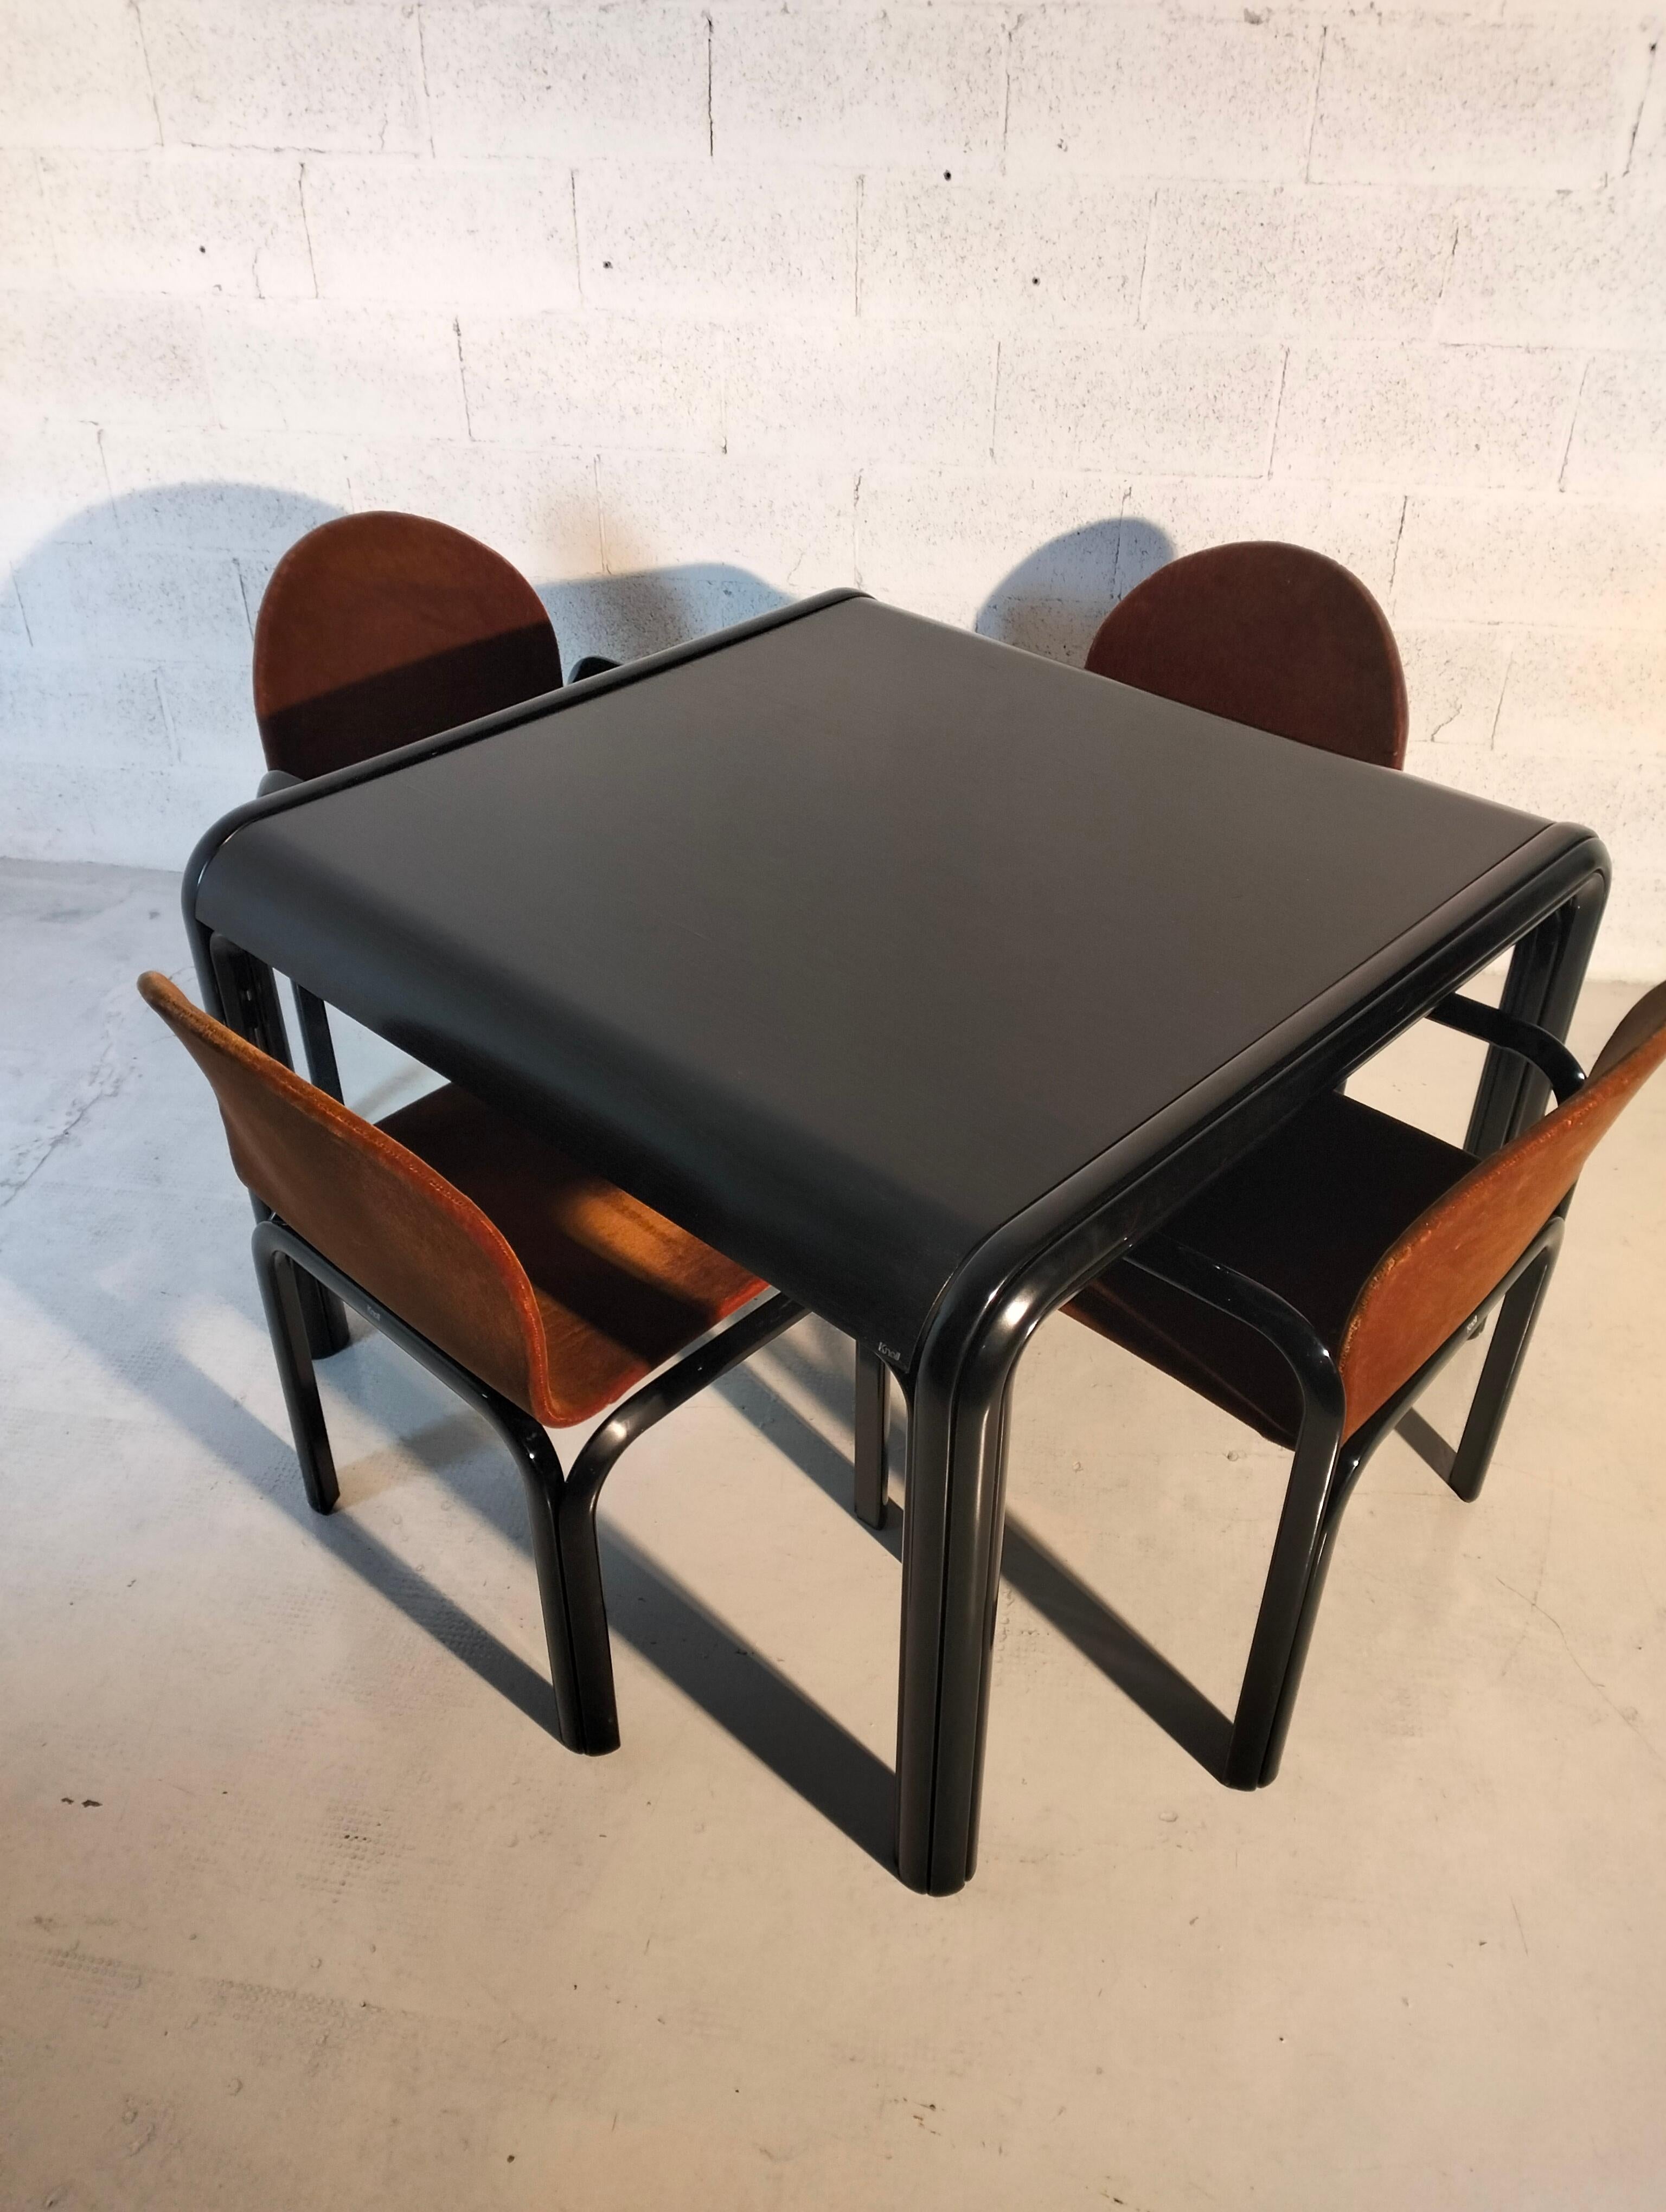 Metal Set of 4 chairs and 1 square table Orsay mod. by Gae Aulenti for Knoll 80s For Sale